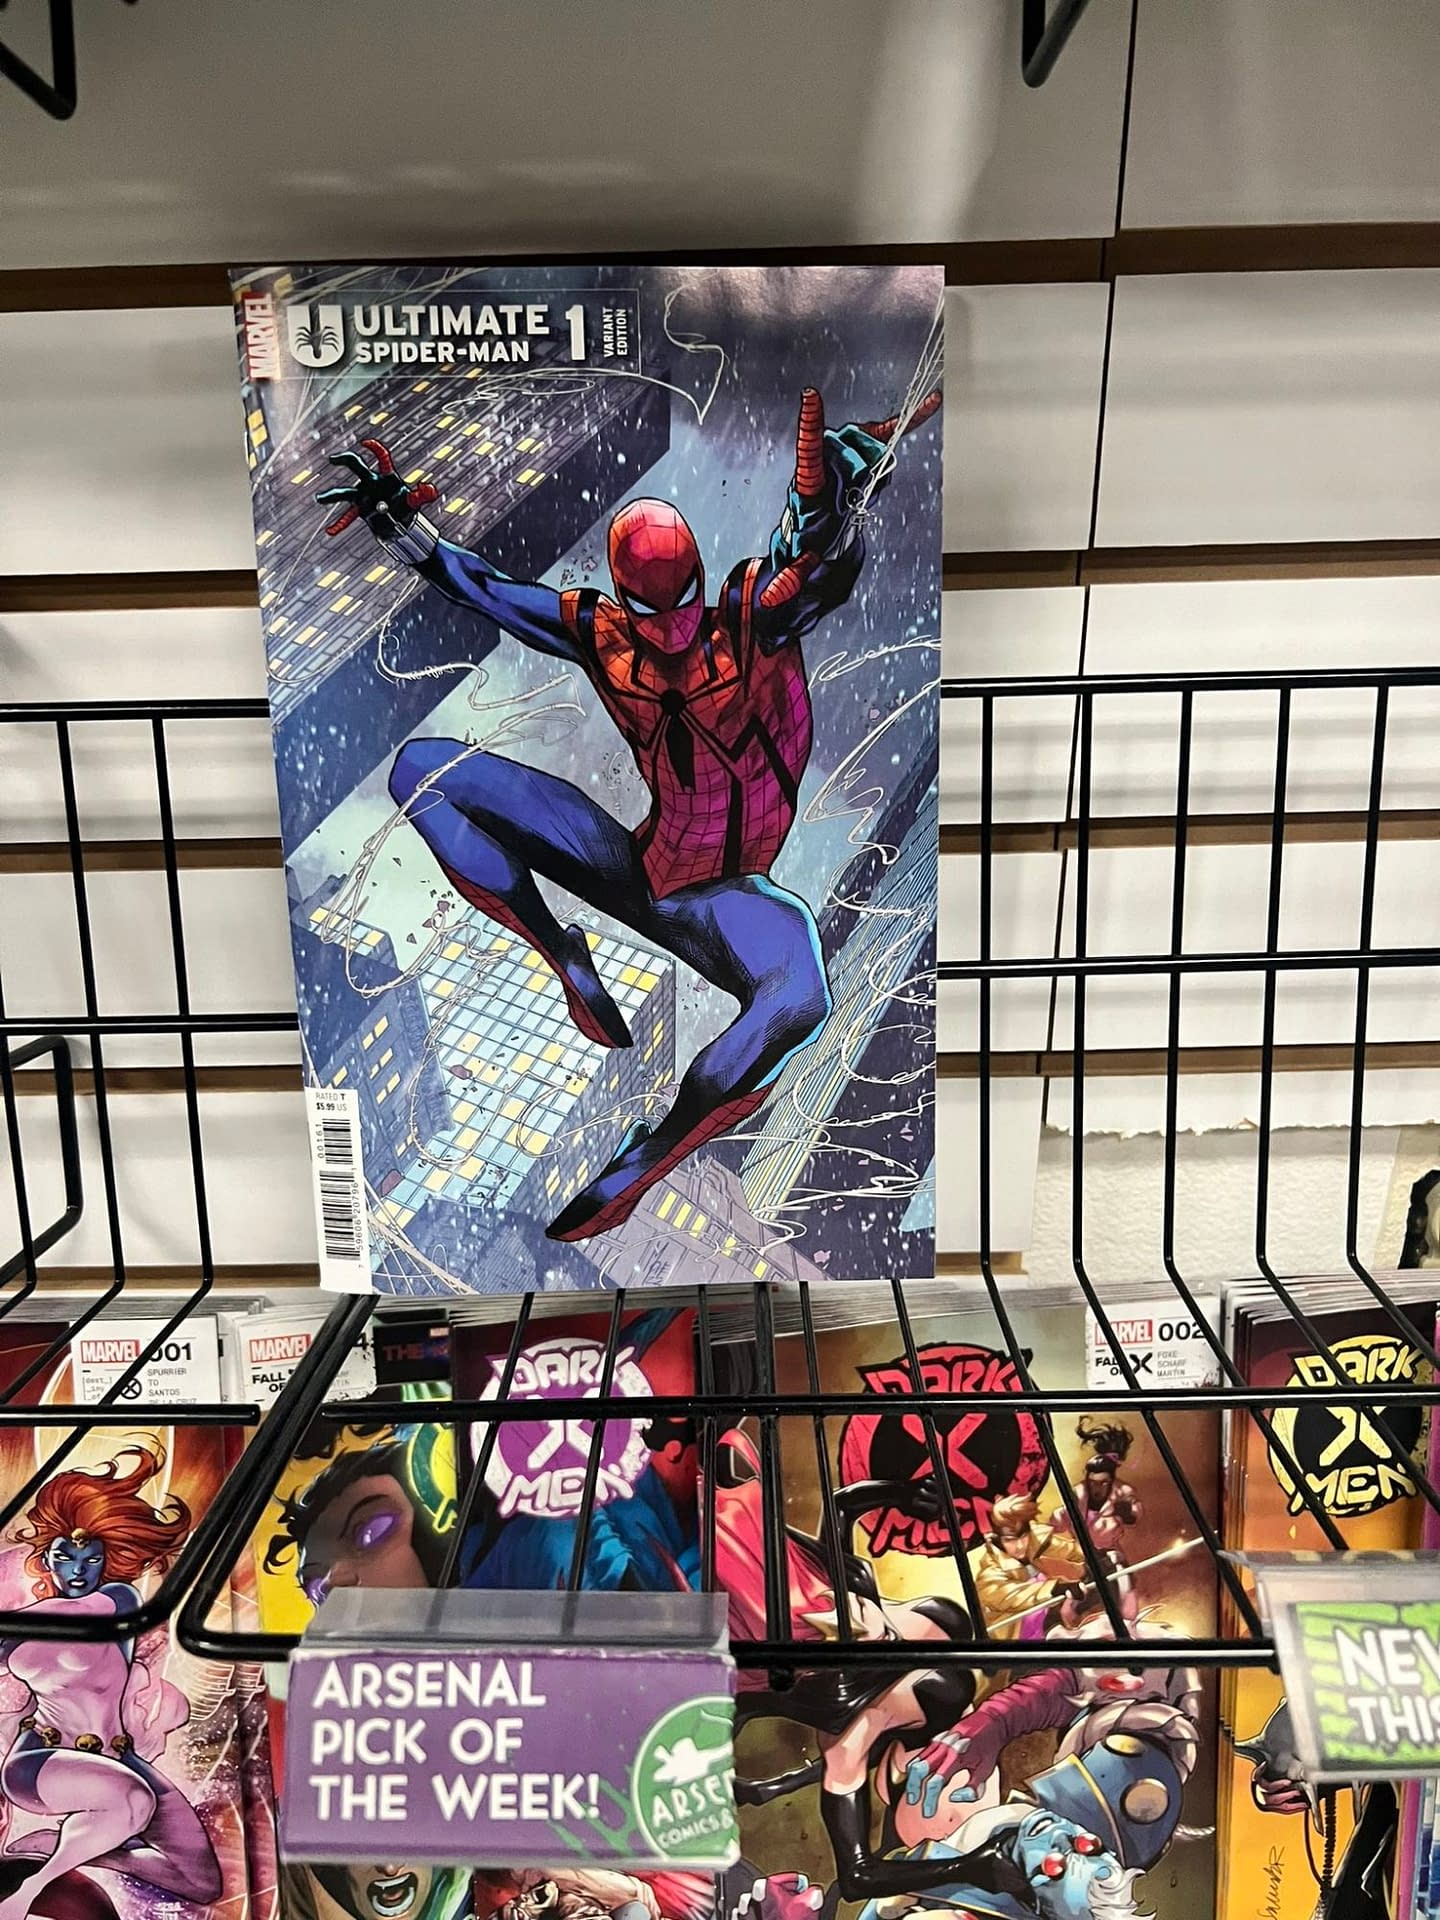 Ultimate Spider-Man #1 Swings to a Second Printing